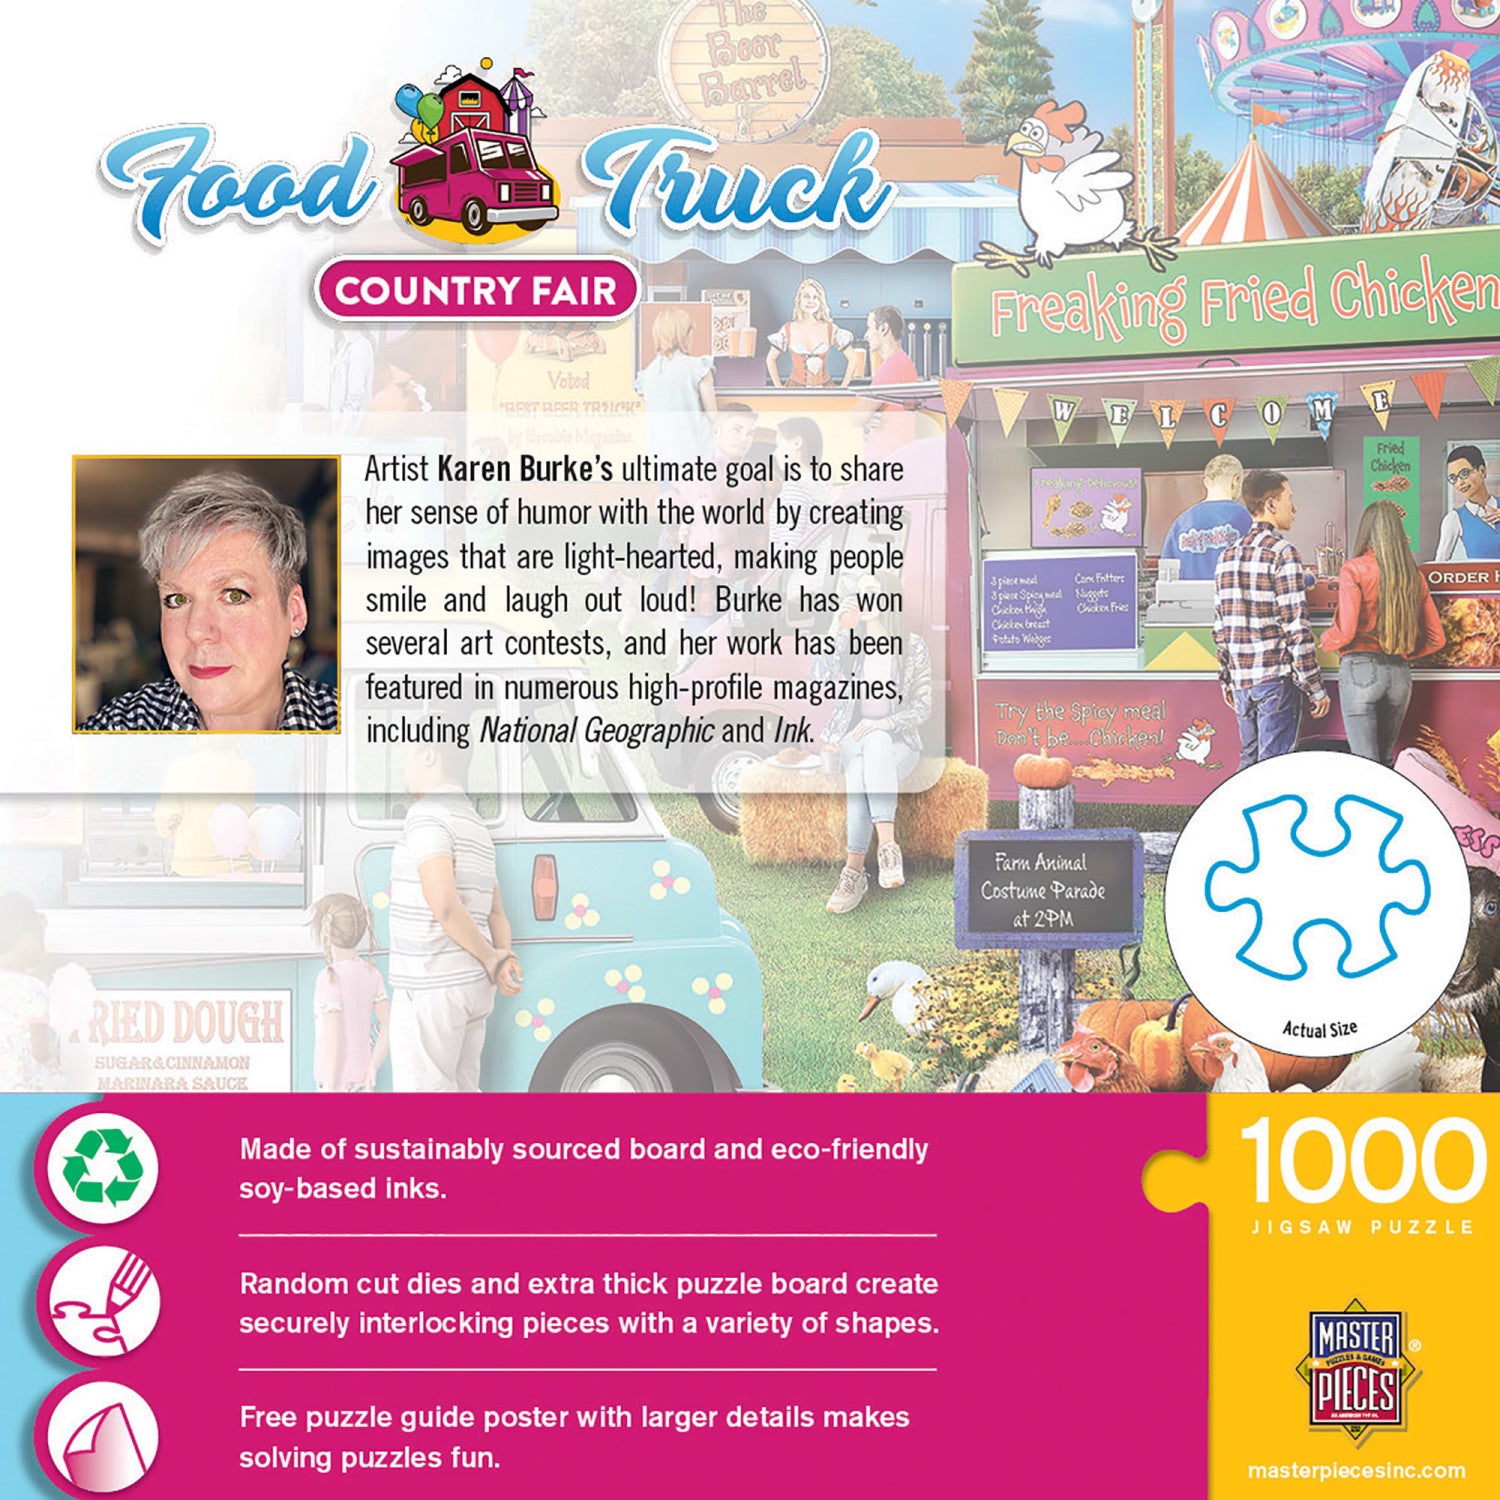 Food Truck Roundup - Country Fair 1000 Piece Jigsaw Puzzle